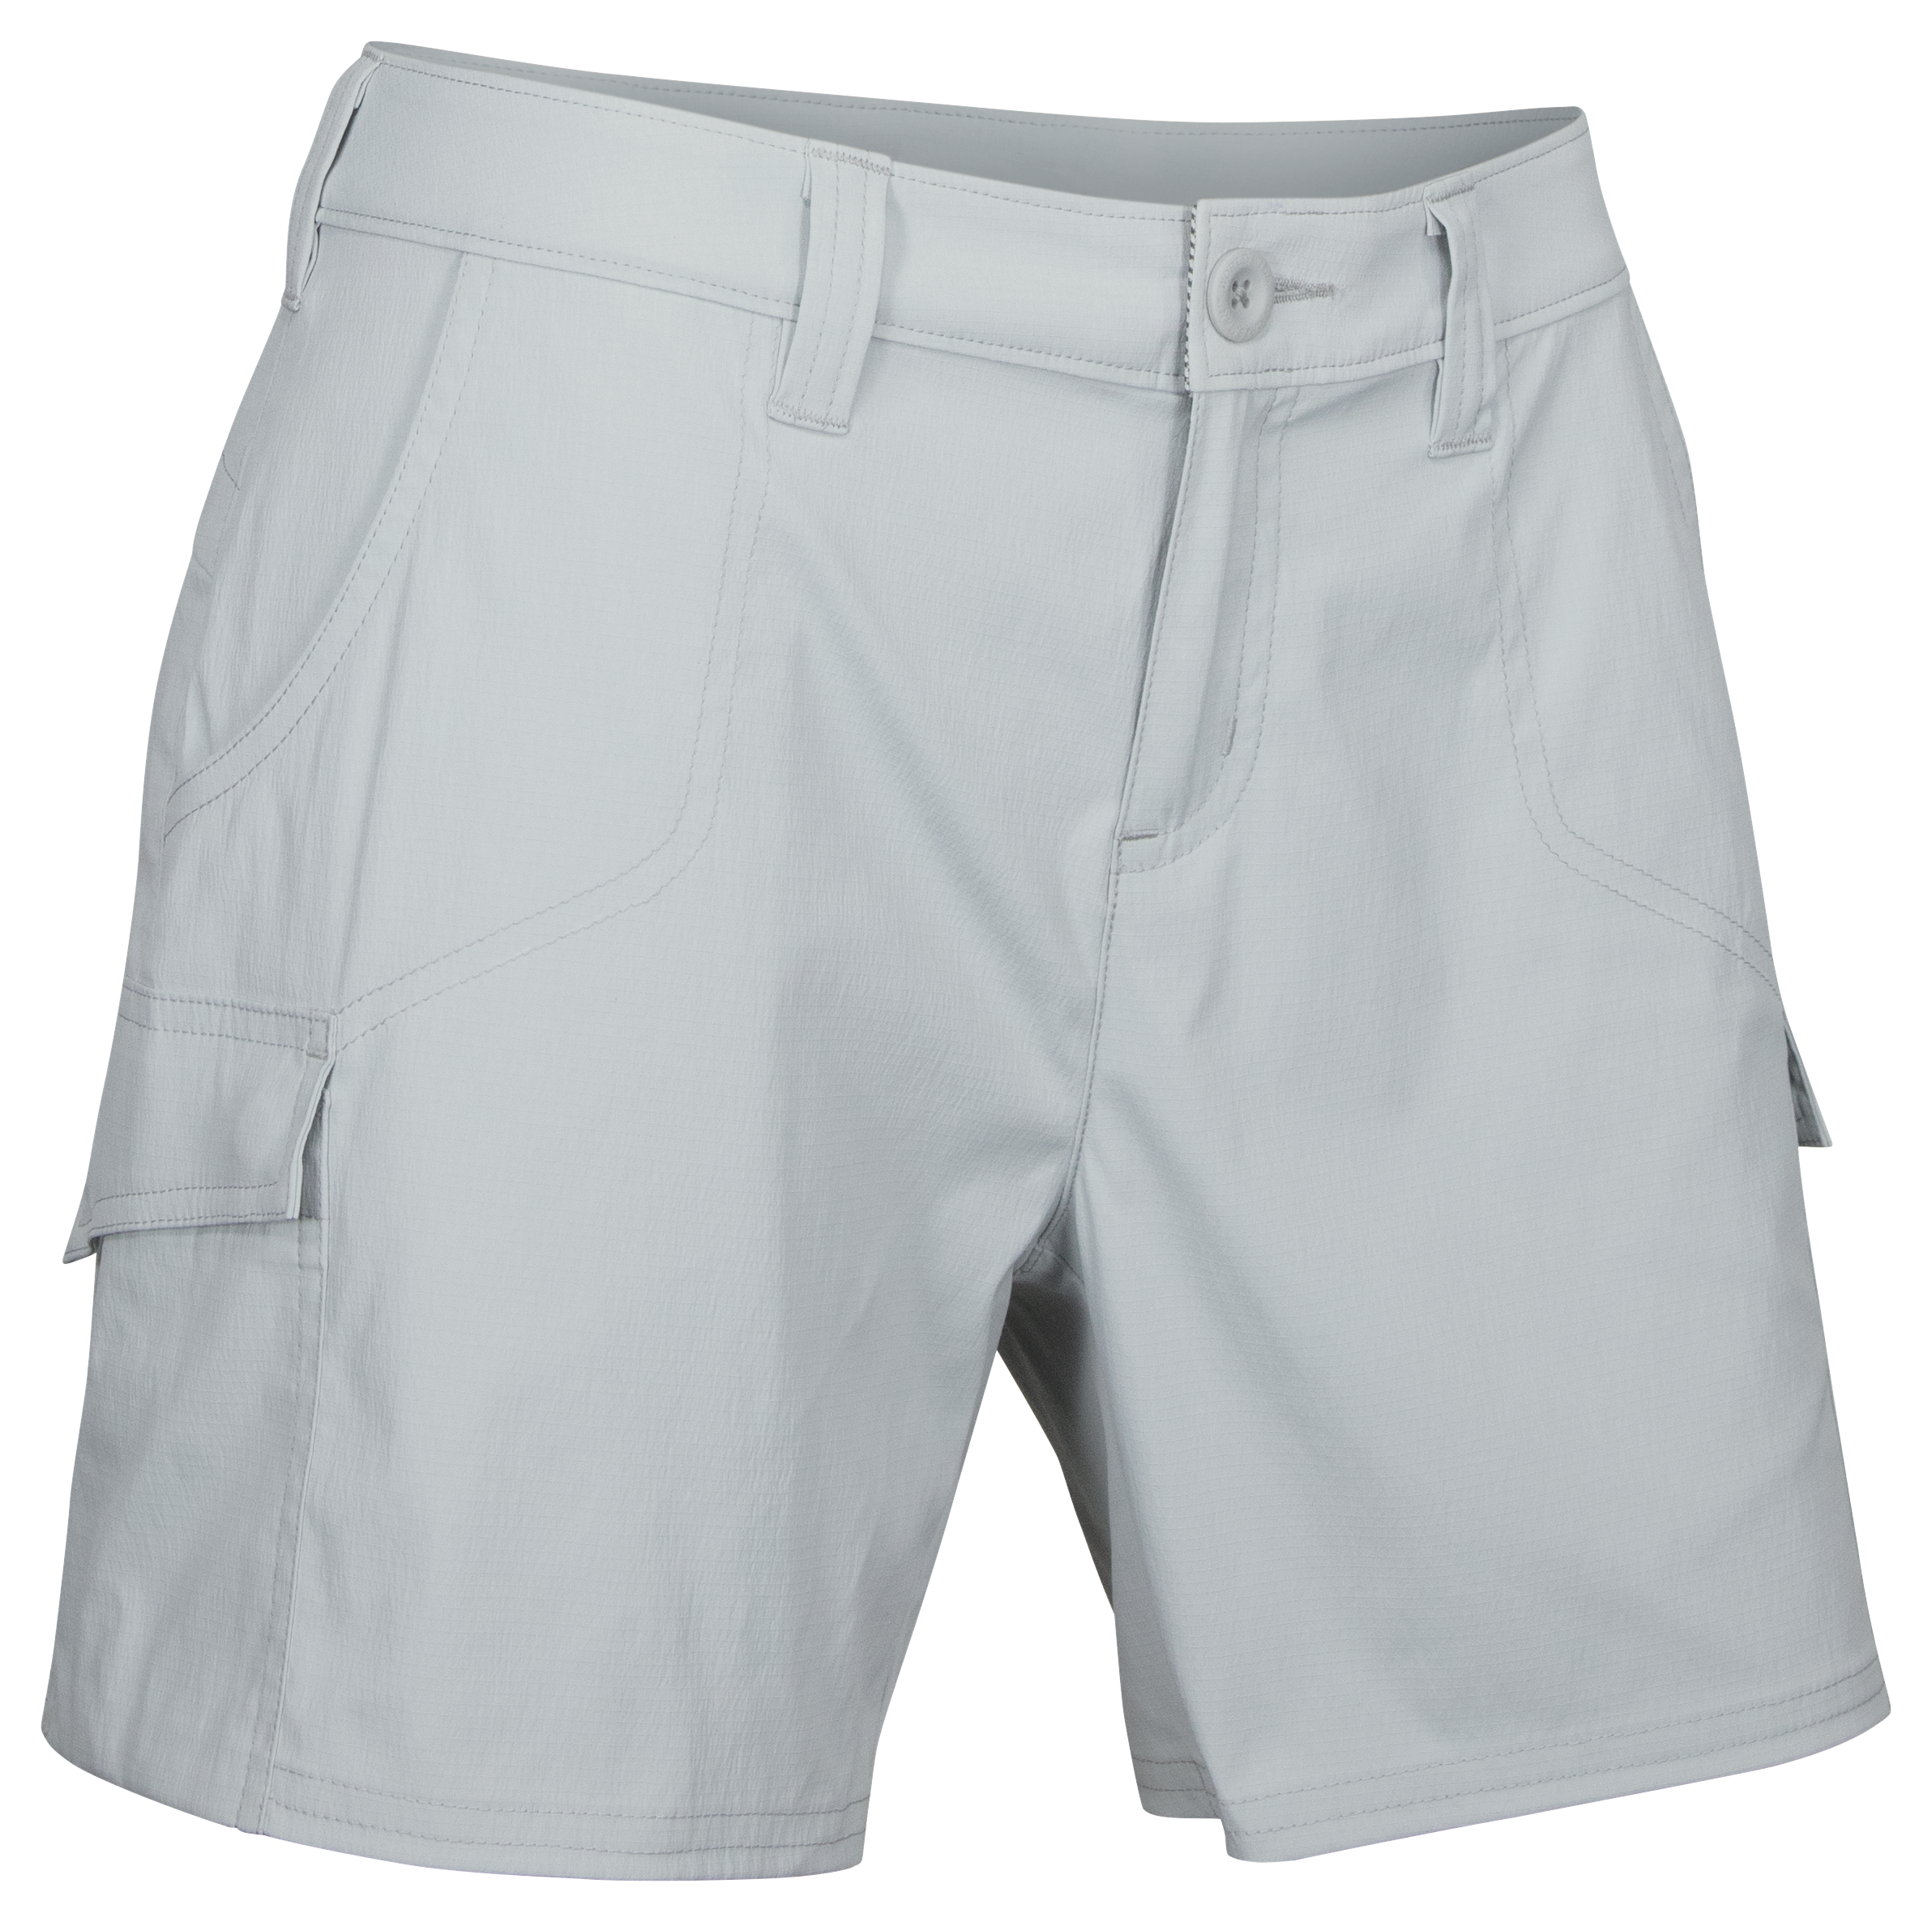 World Wide Sportsman Ripstop Cargo Shorts for Ladies - High Rise-20 - 18